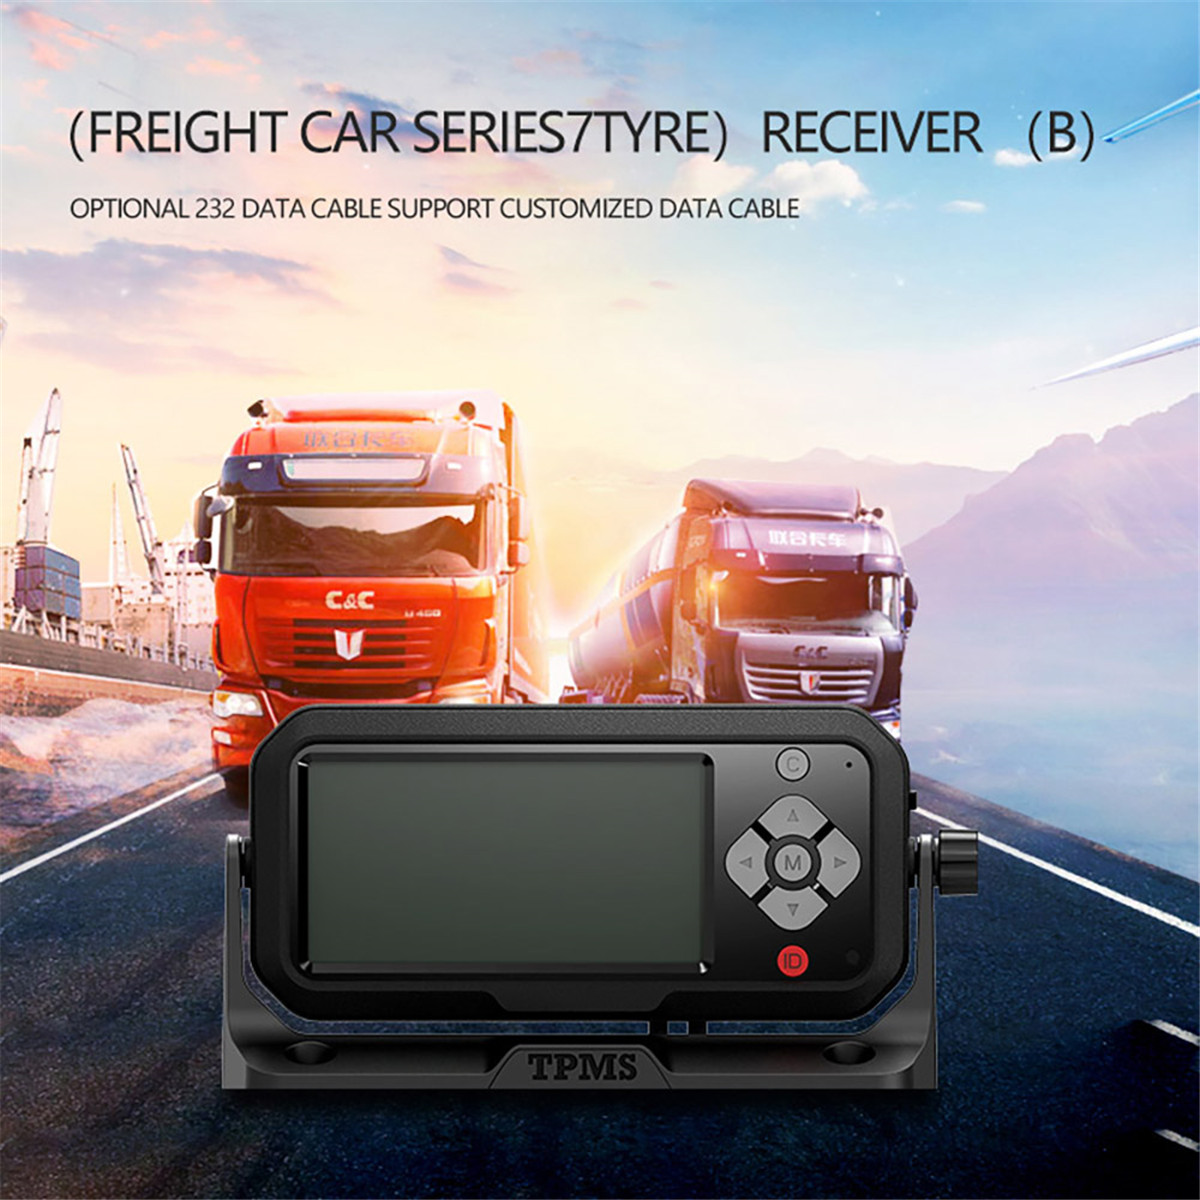 (Freight car series7tyre) Receiver (9)